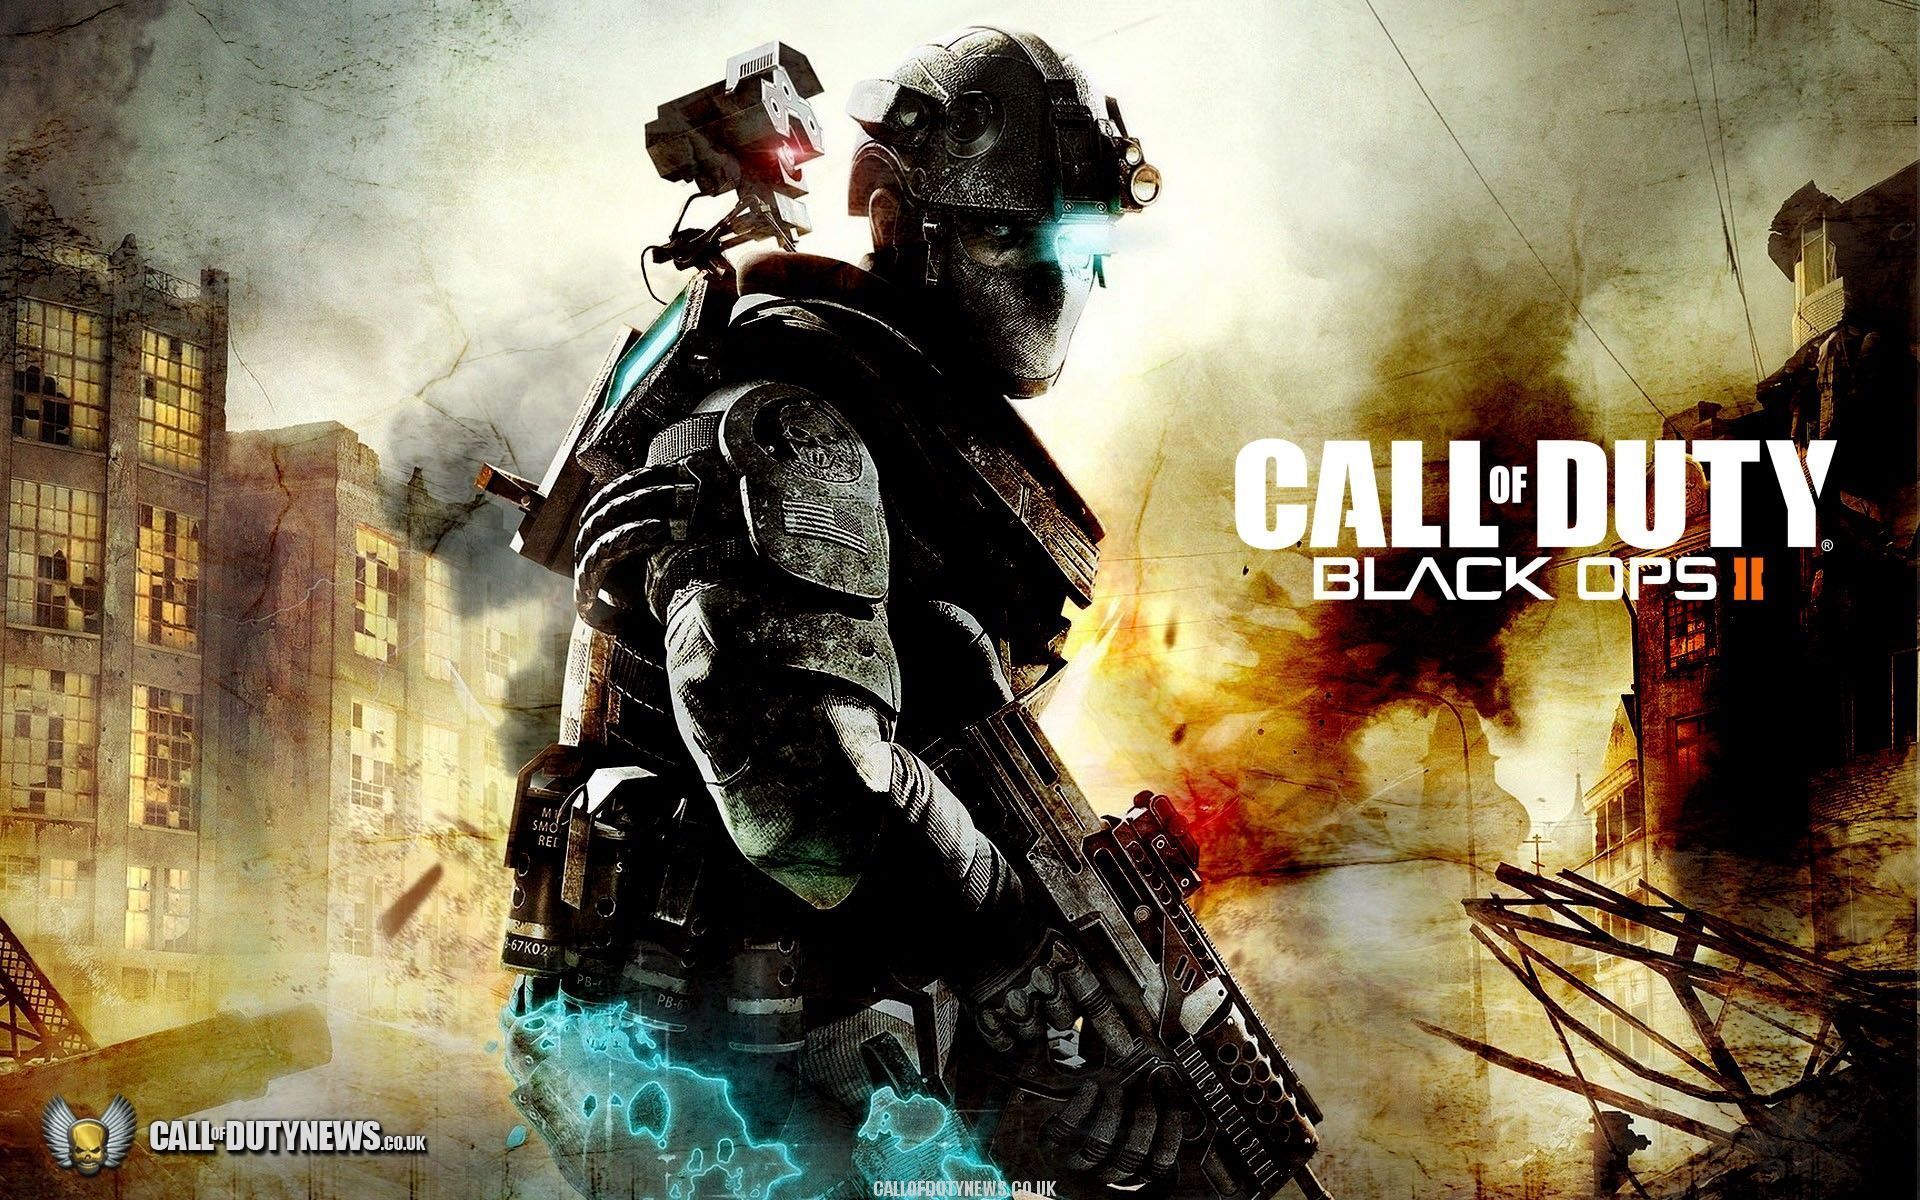 Call of Duty HD Wallpapers - Cool Wallpapers